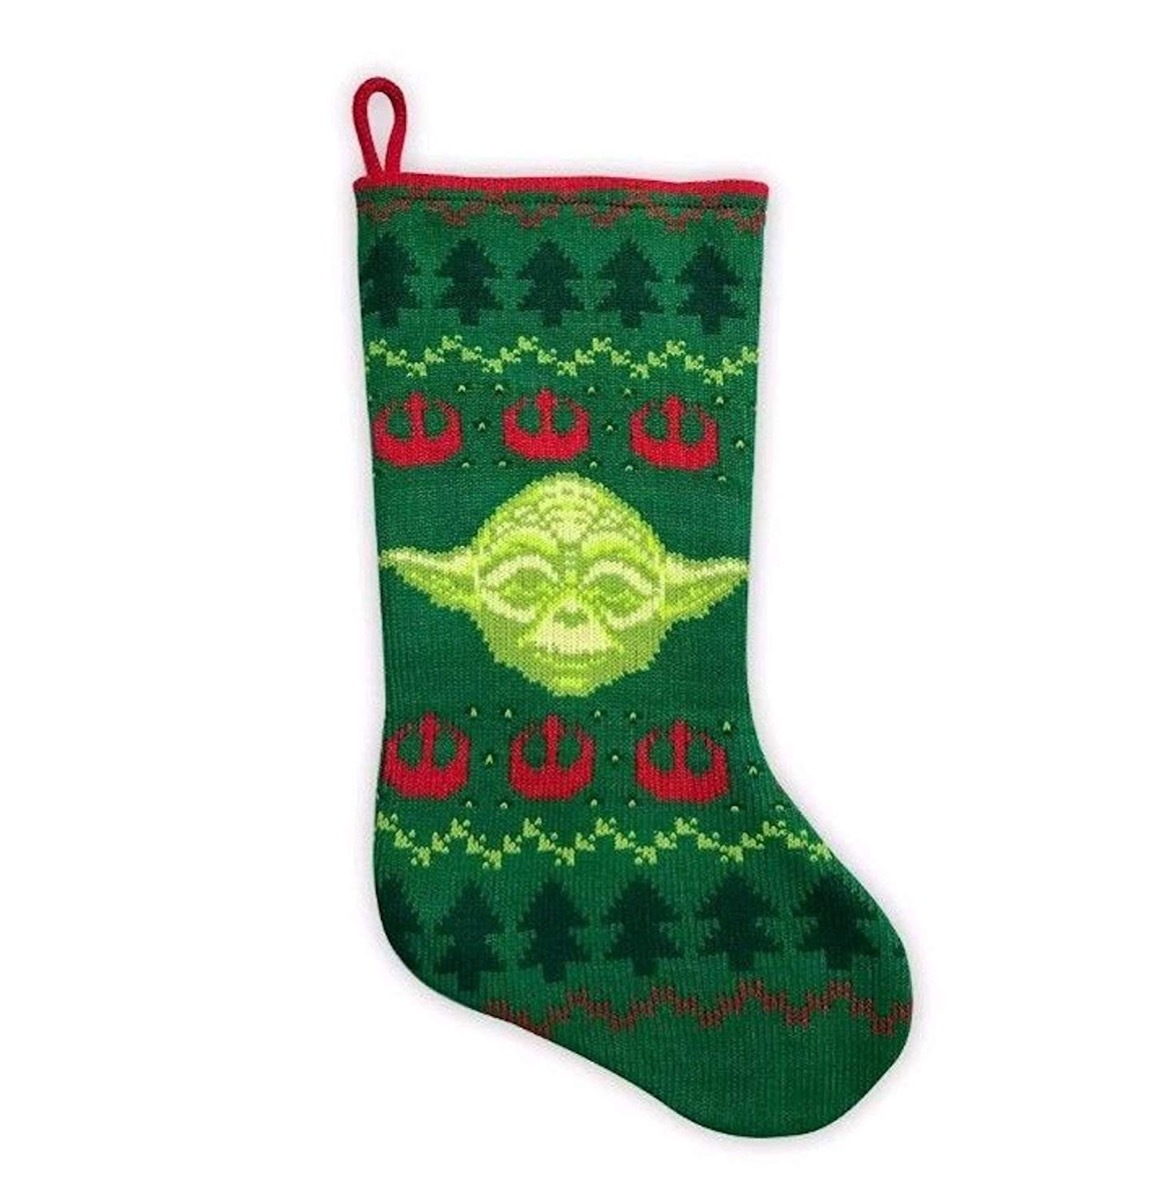 green and red knit yoda stocking